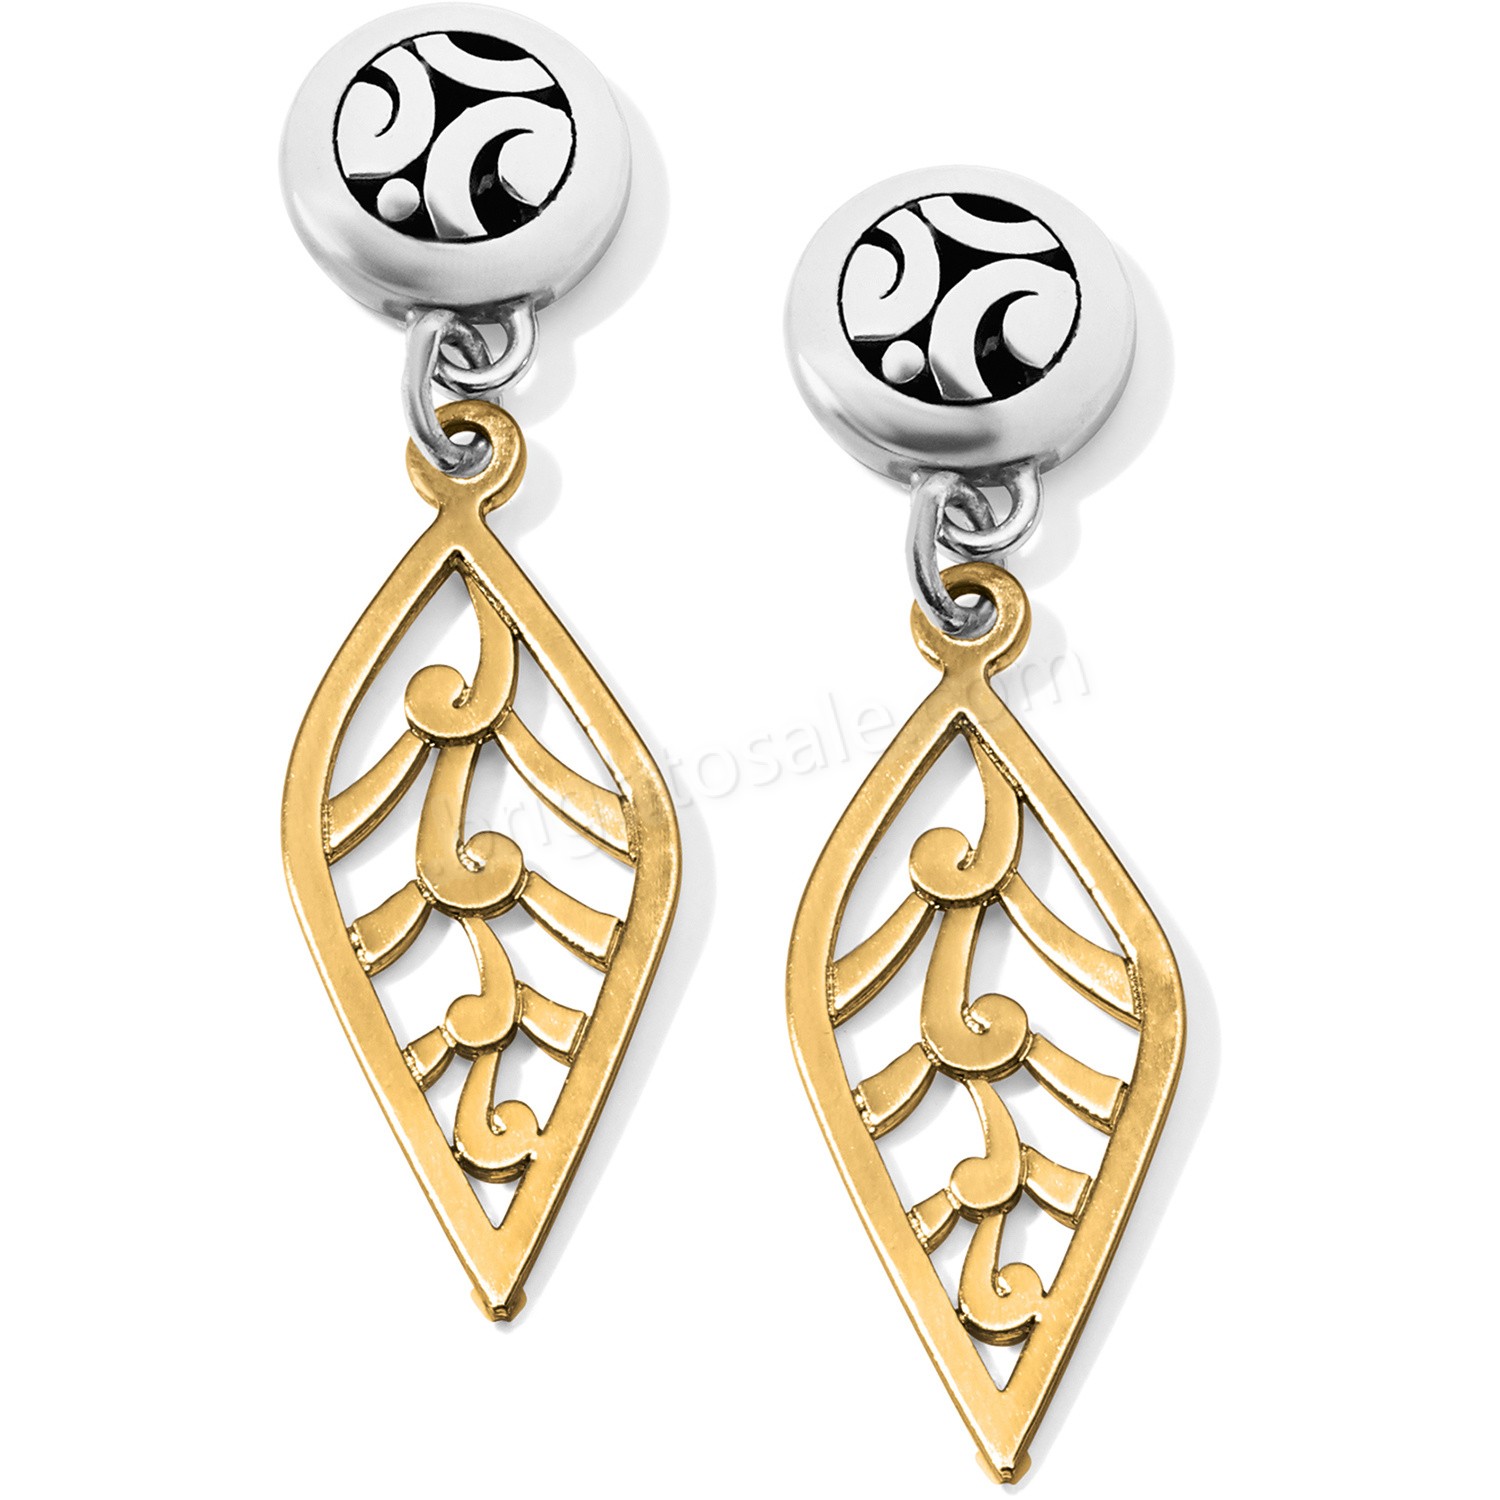 Brighton Collectibles & Online Discount Trust Your Journey Butterflies French Wire Earrings - Brighton Collectibles & Online Discount Trust Your Journey Butterflies French Wire Earrings